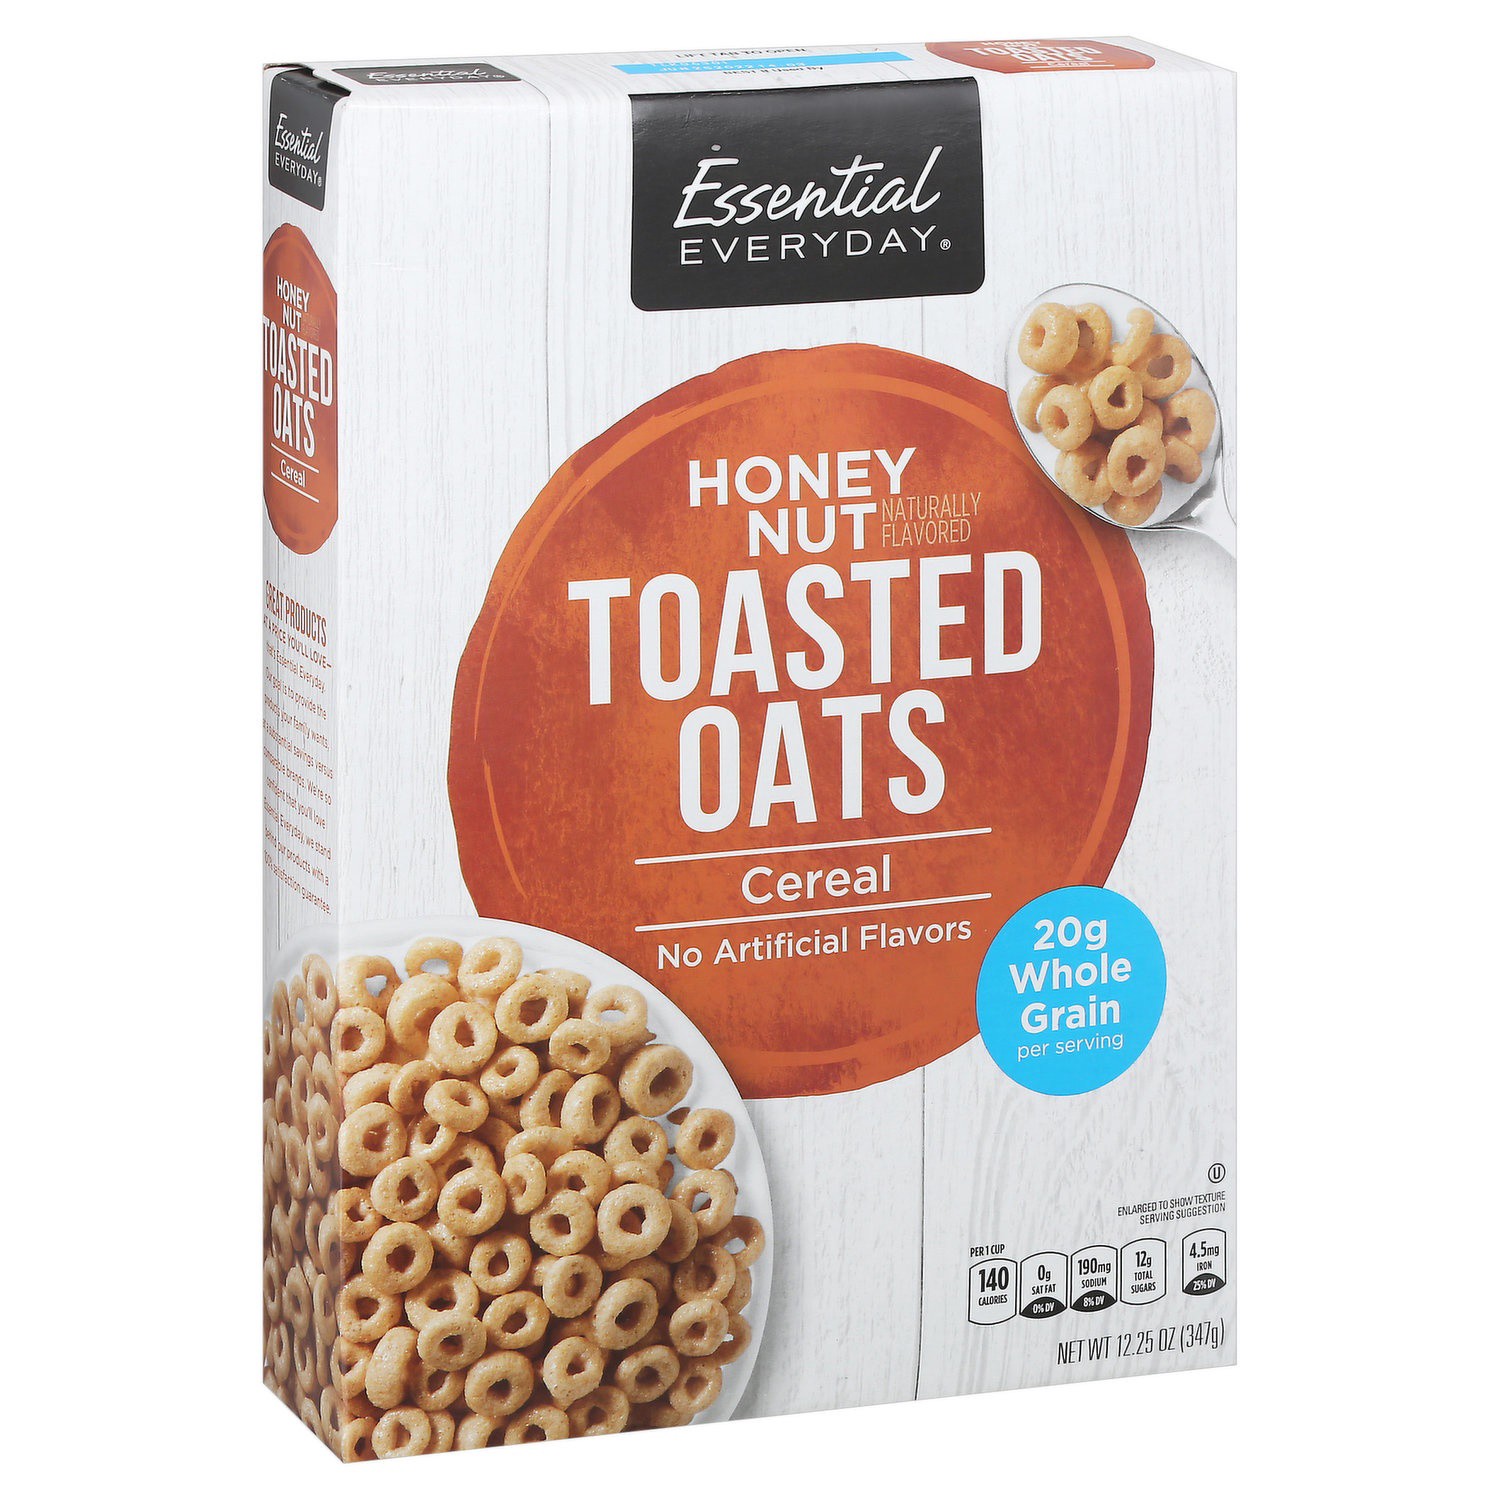 Essential Everyday Honey Nut Toasted Oats 12.25 oz